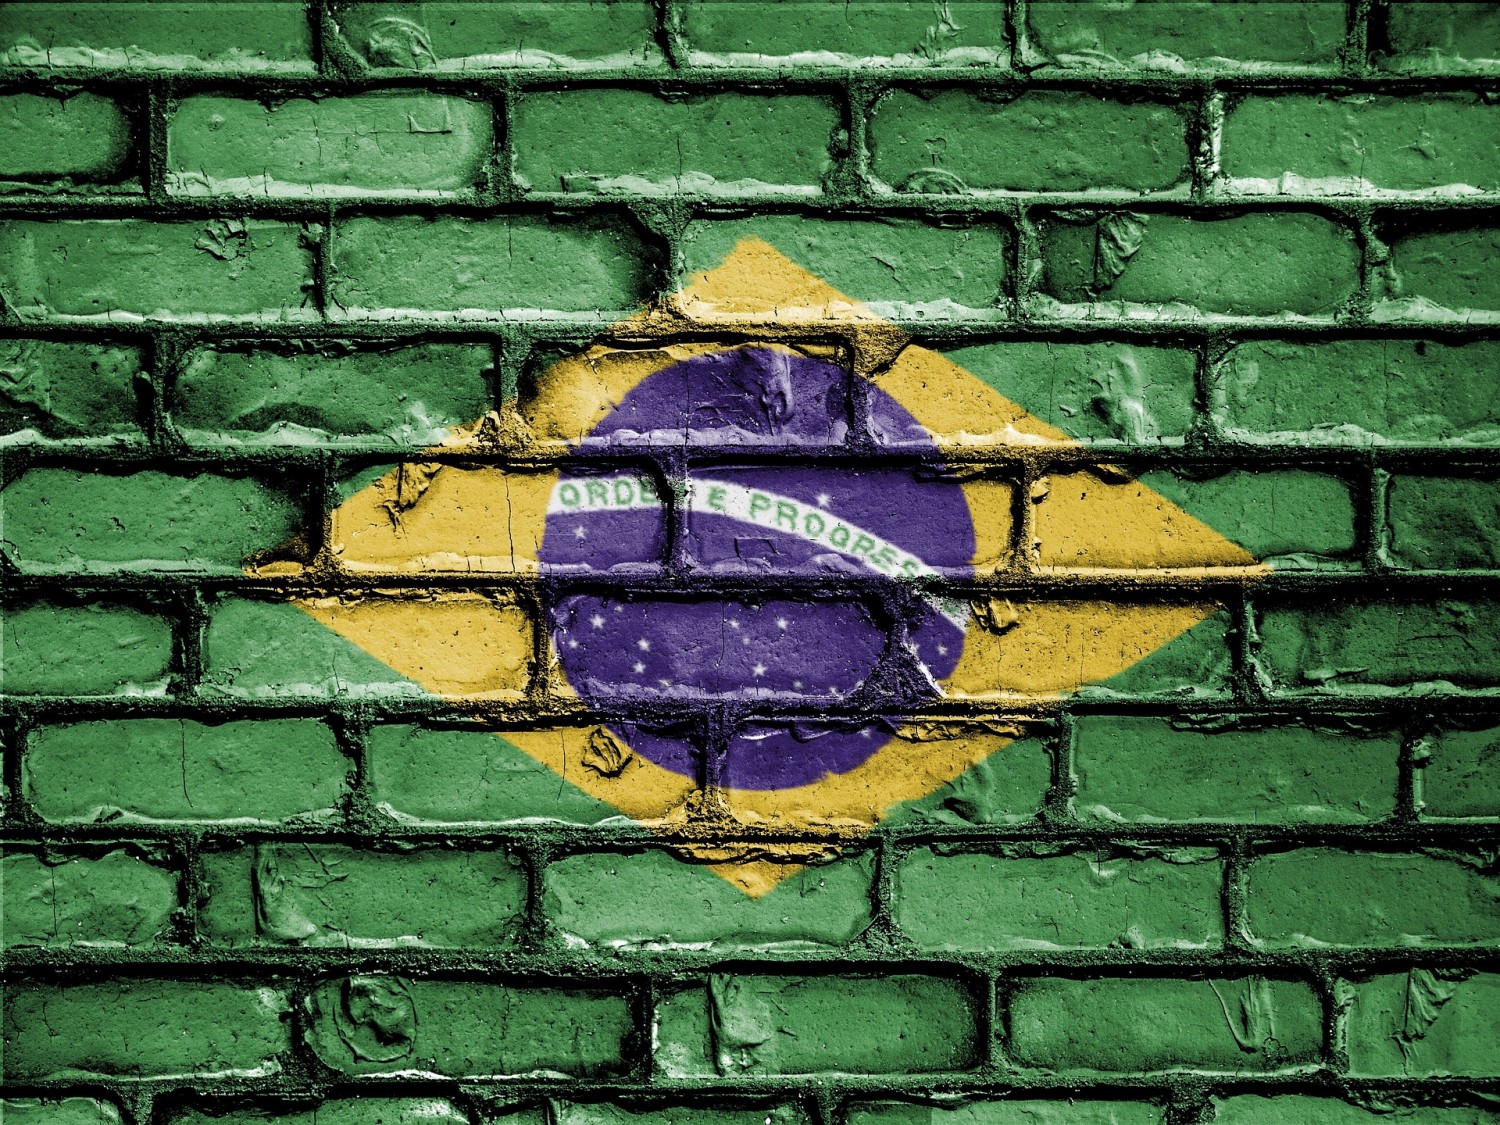 Facebook Removing Content Backing Brazil Riots